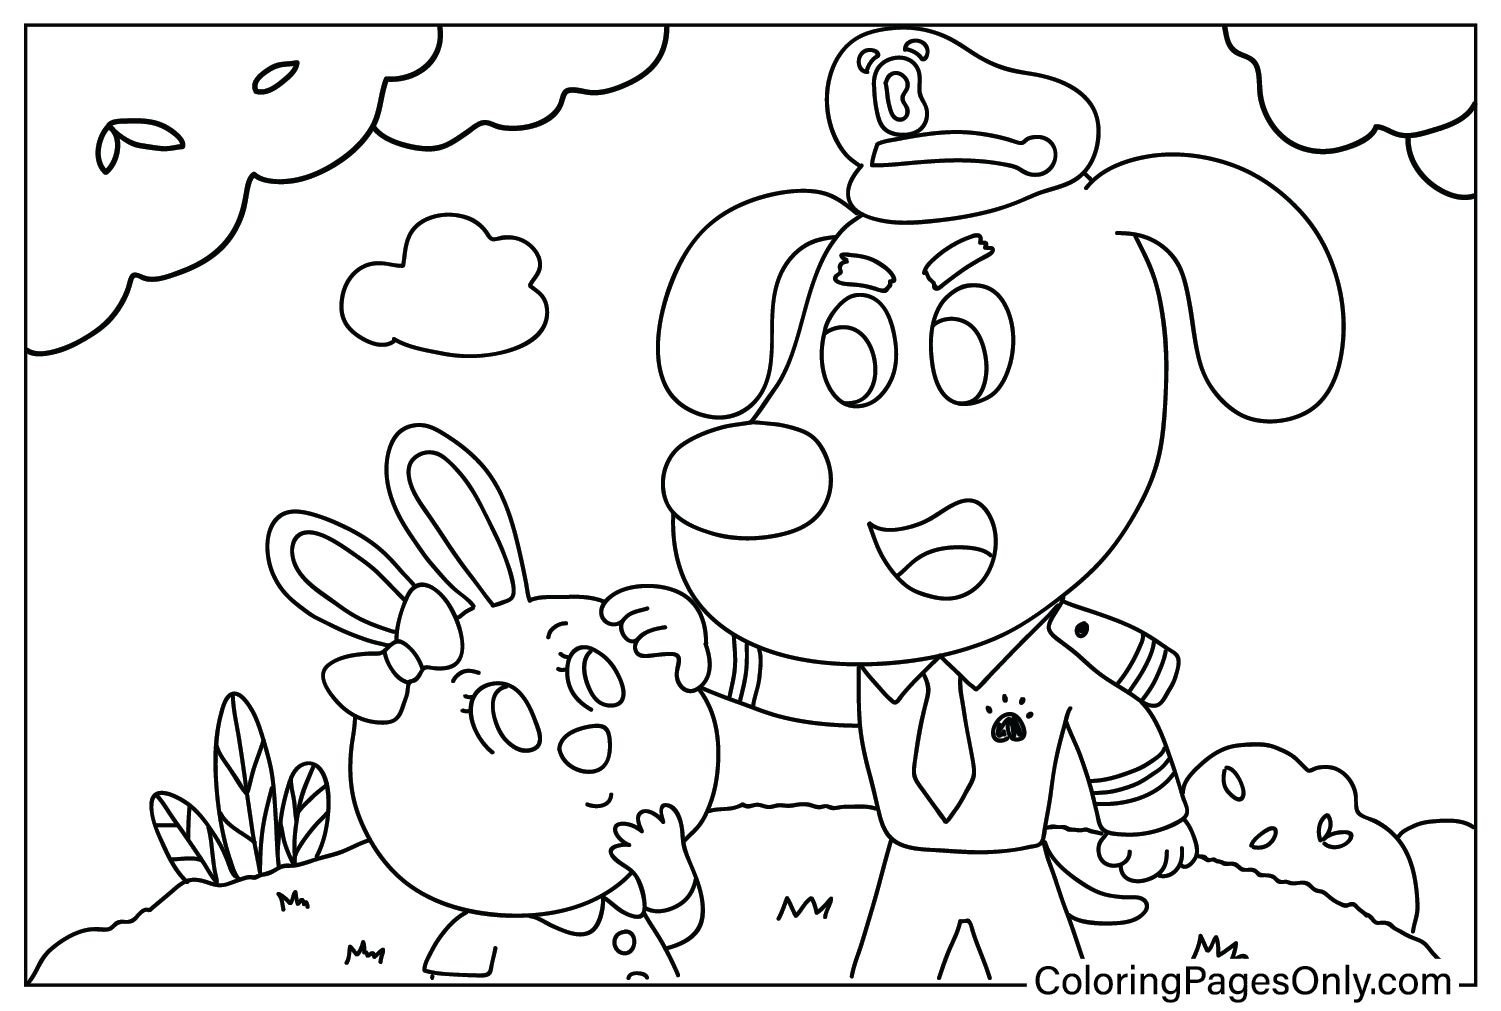 Coloring Page Safety Sheriff Labrador from Safety Sheriff Labrador